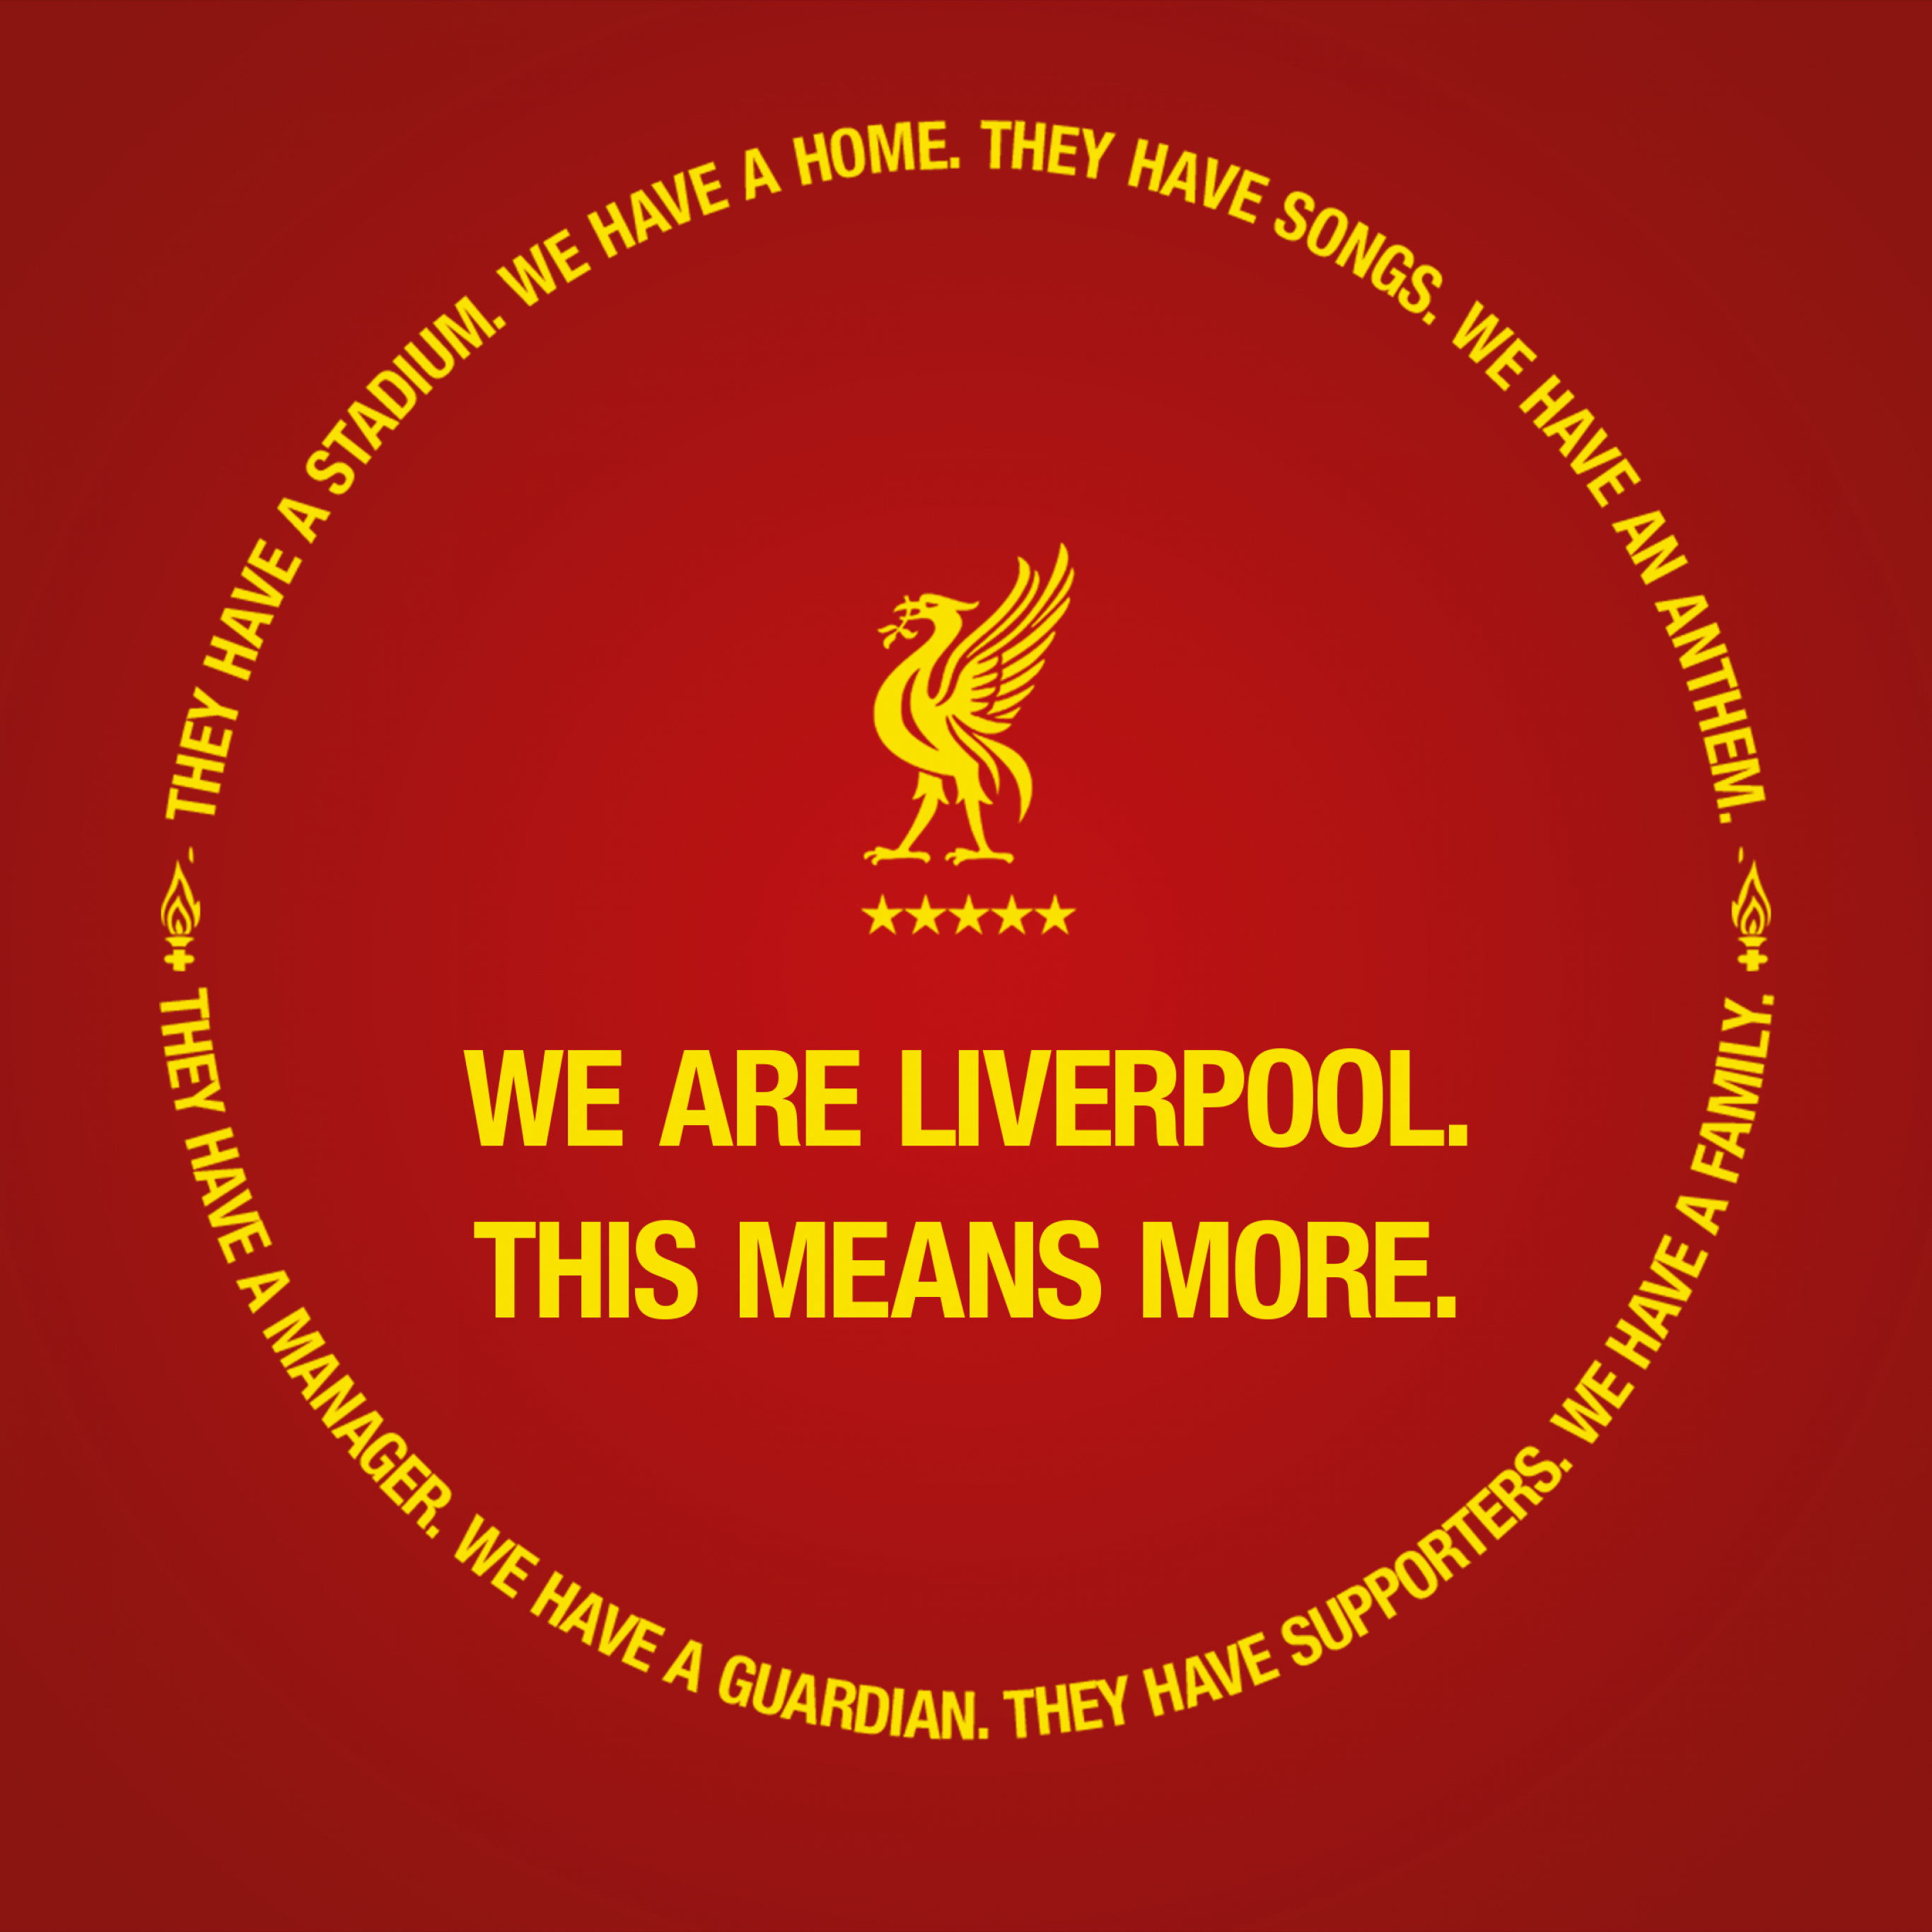 3840x2400 / Soccer, Logo, Liverpool F.C. wallpaper - Coolwallpapers.me!